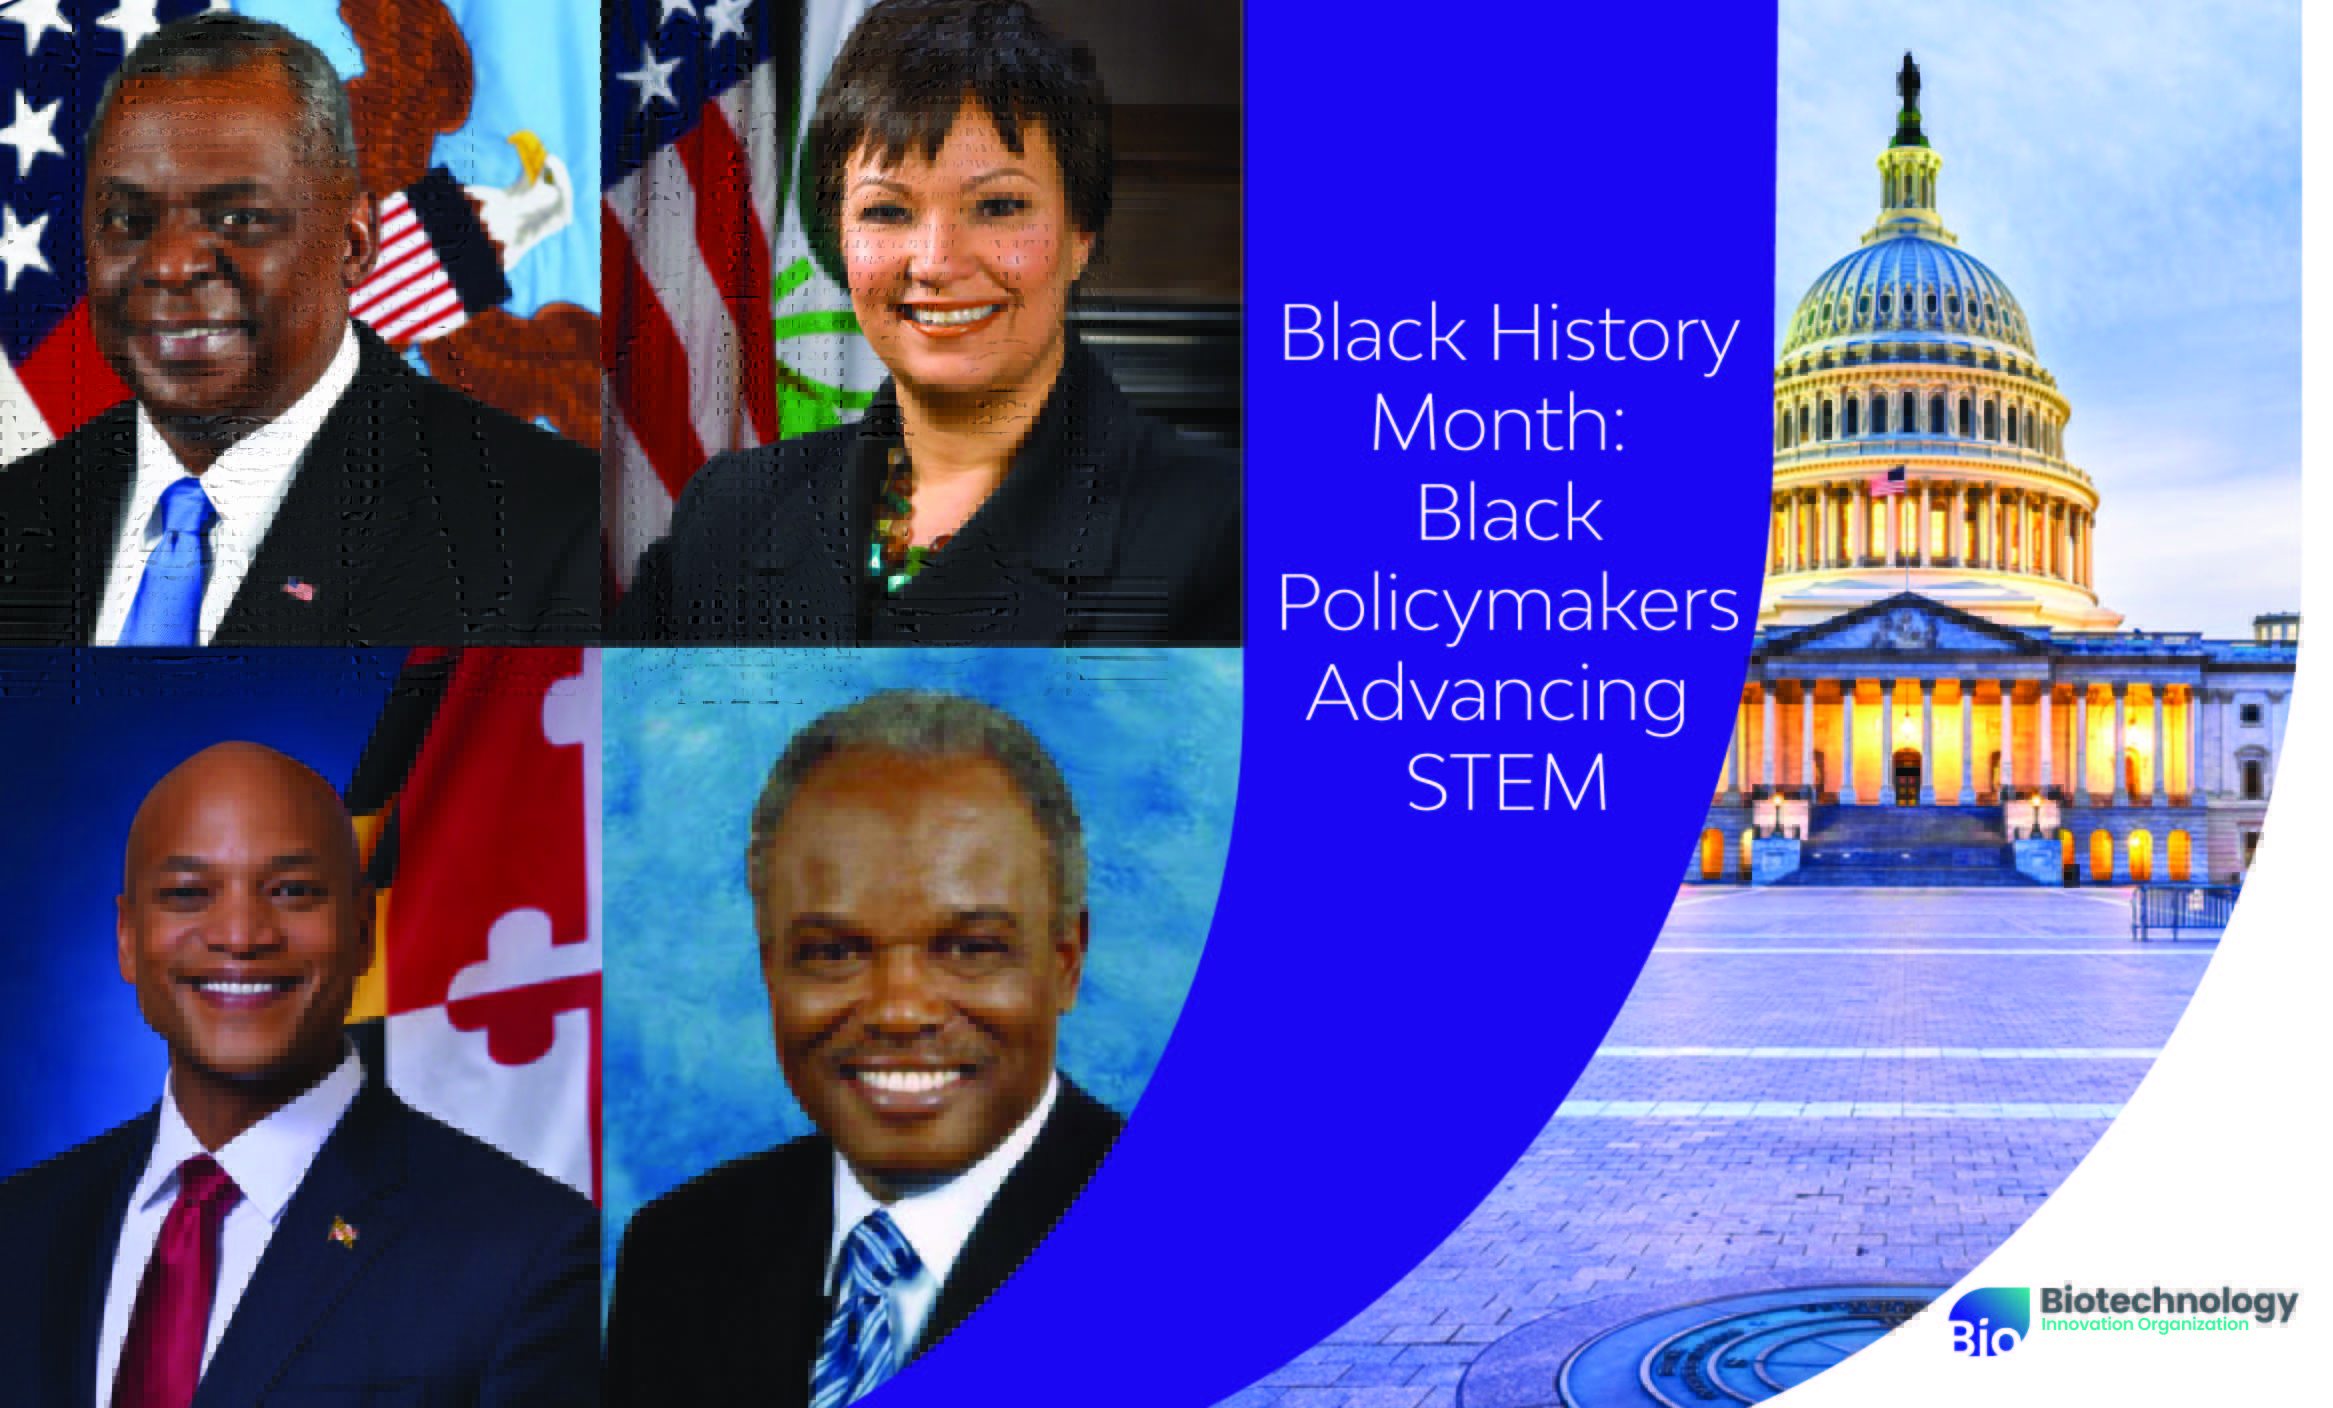 Learn about Black policymakers who have advanced biotech and STEM.